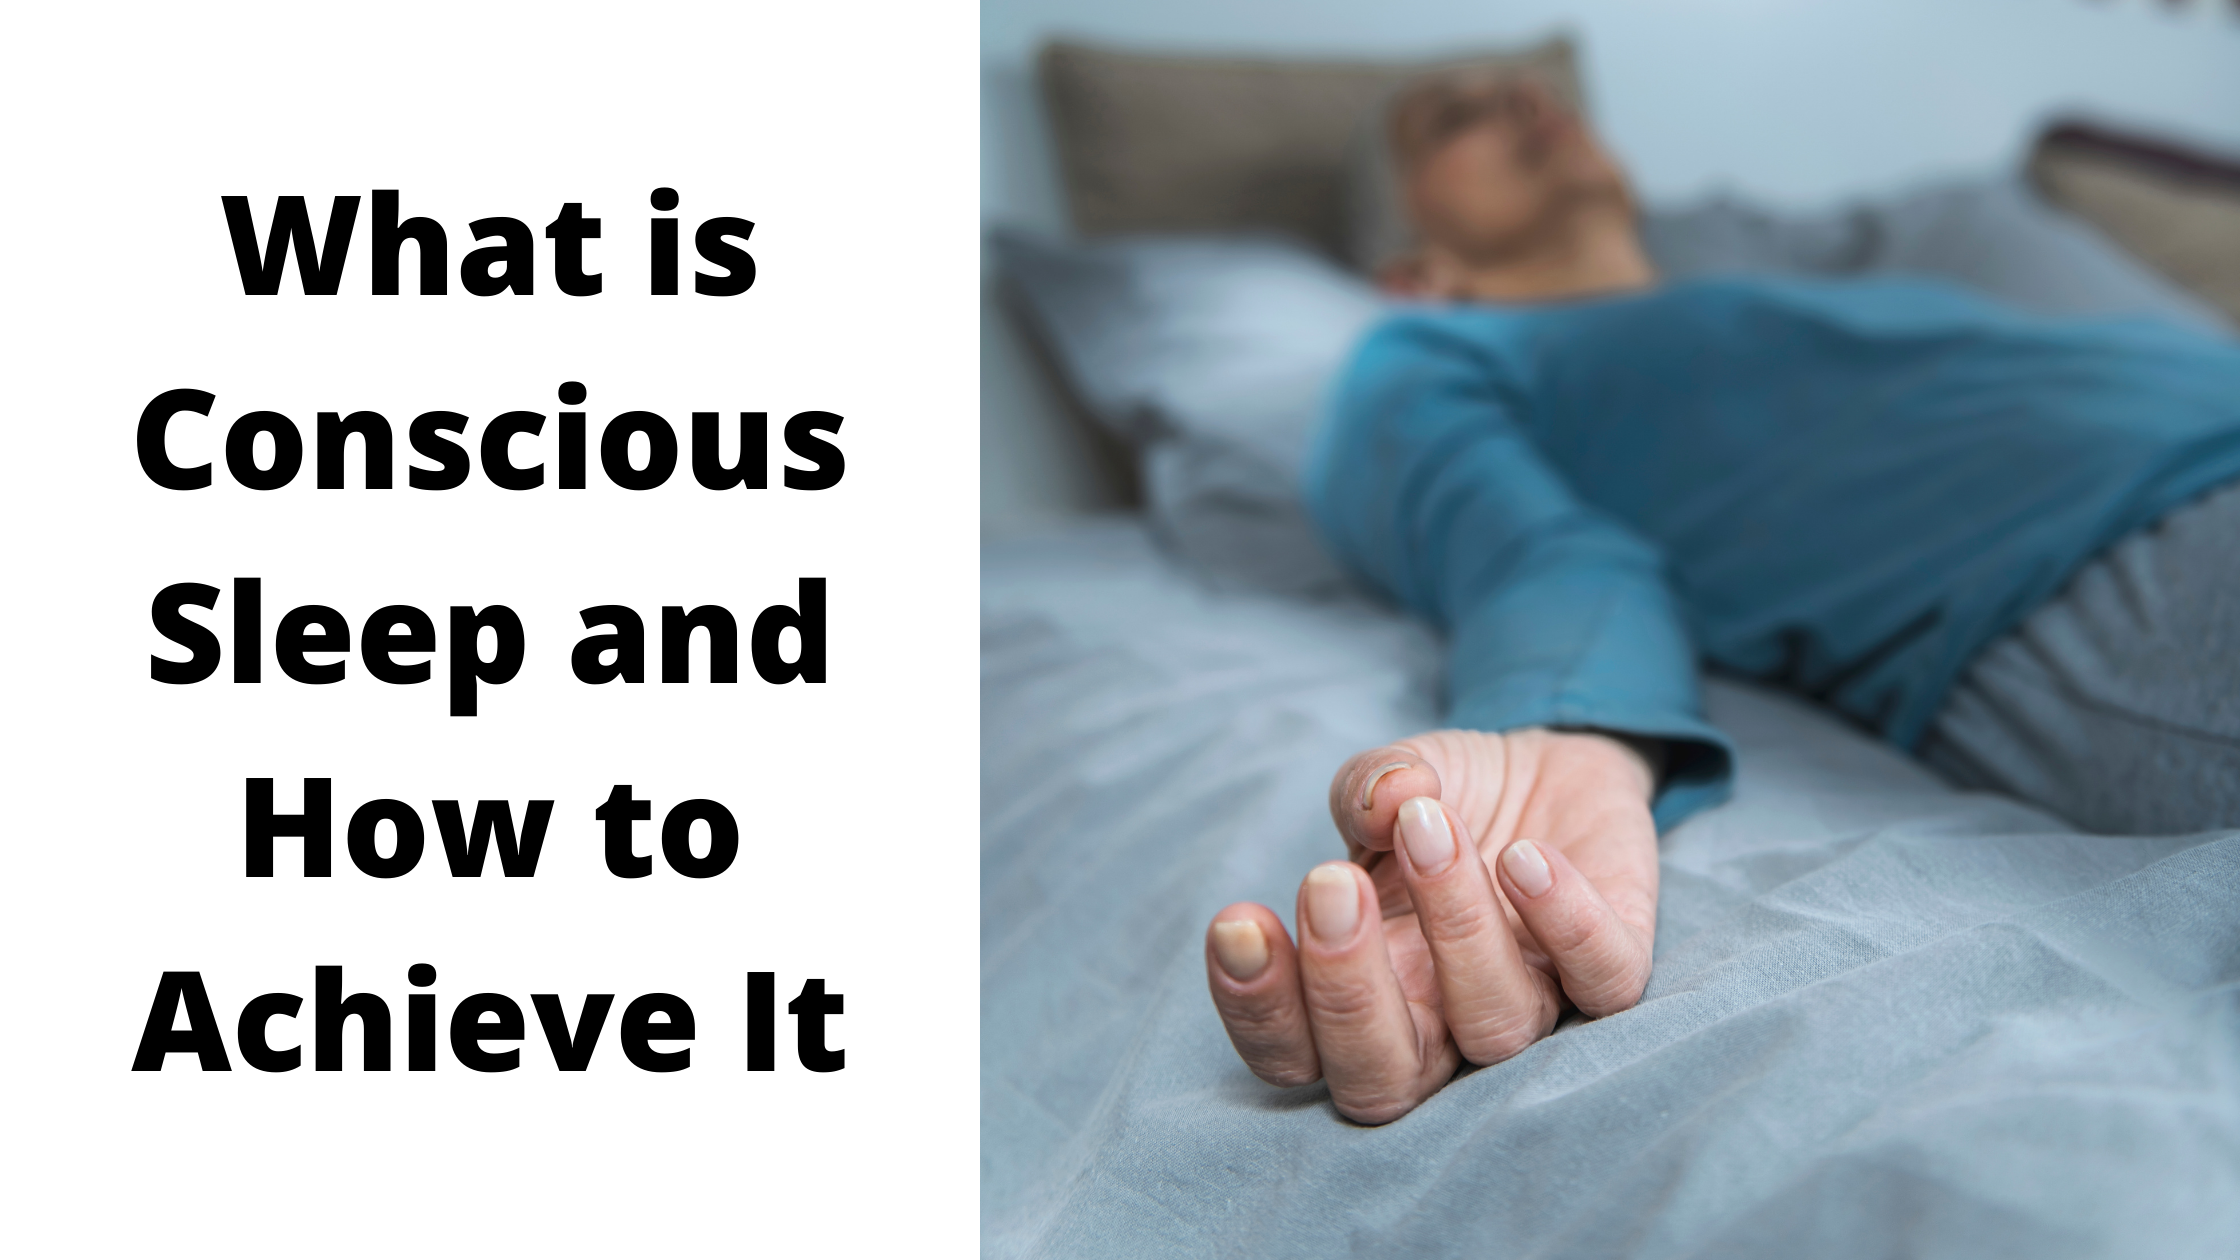 What is Conscious Sleep and How to Achieve It